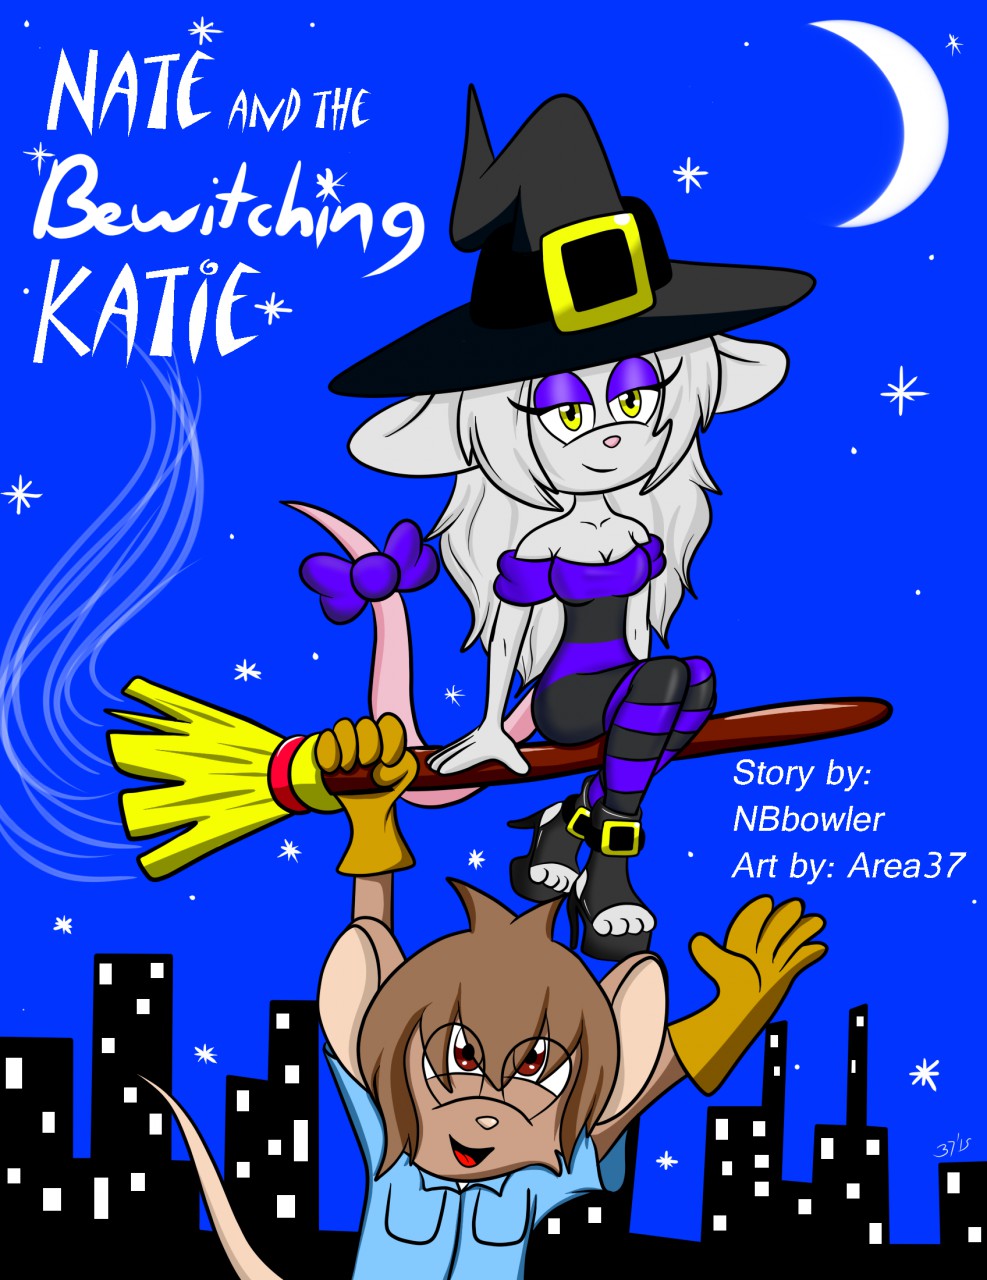 Nate and the Bewitching Katie00